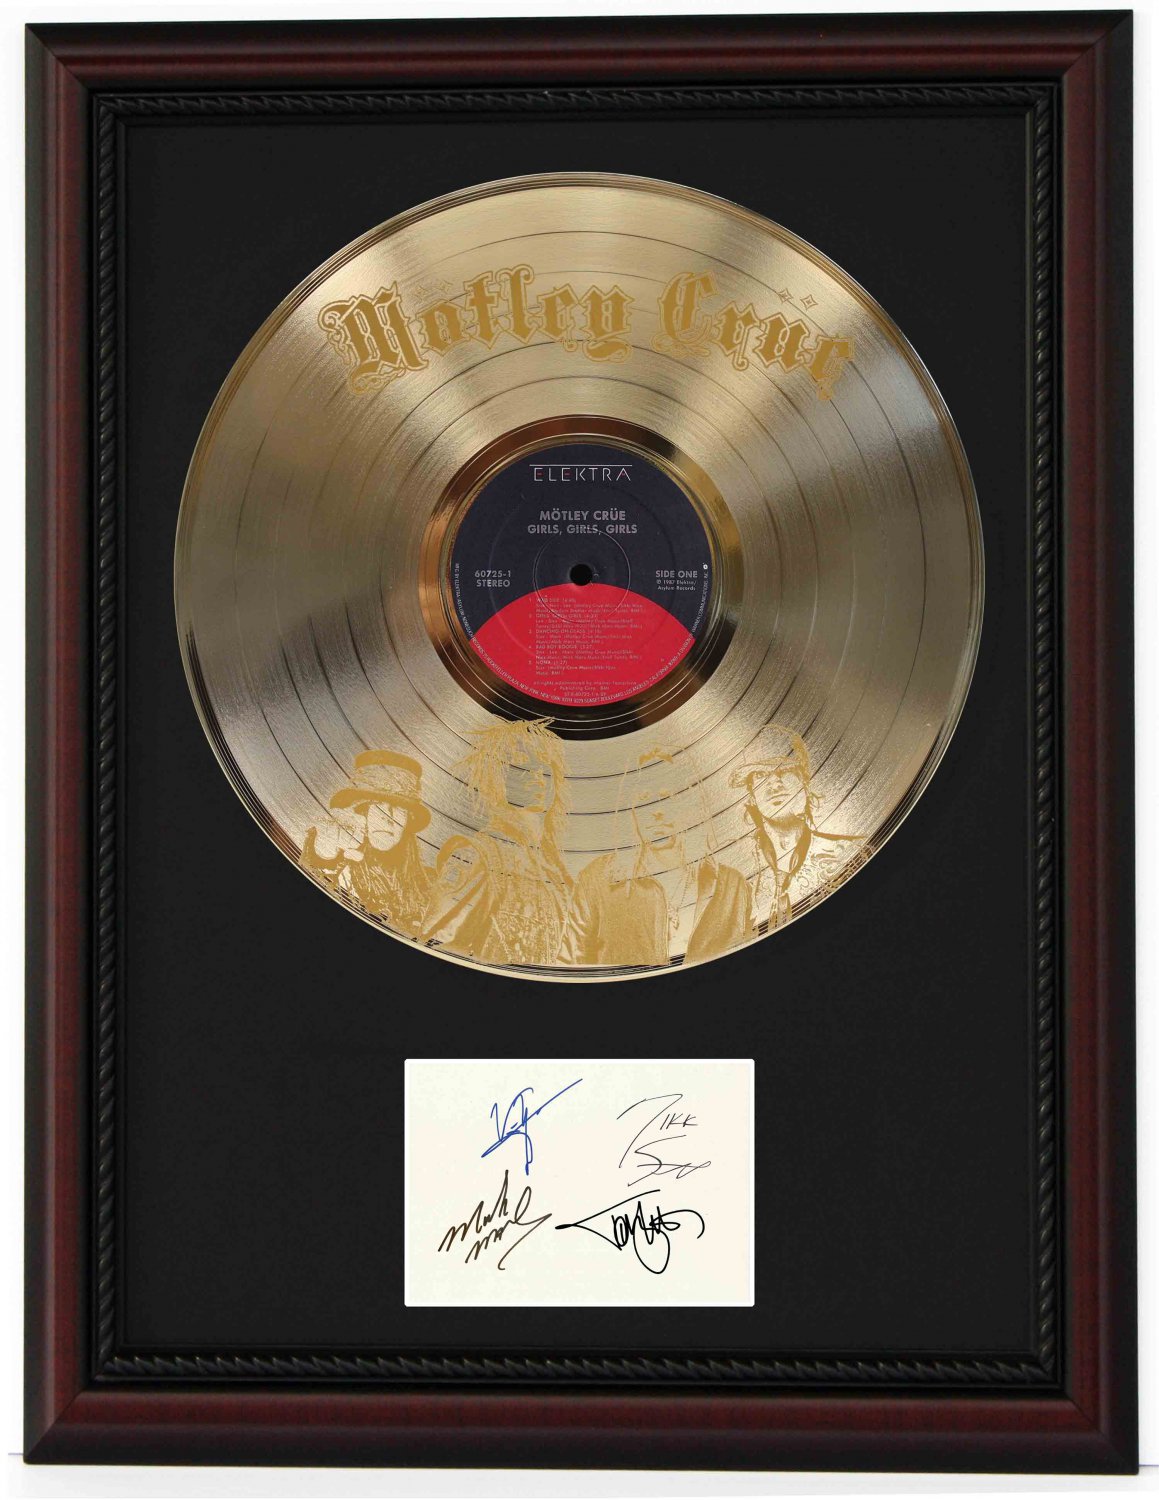 MOTLEY CRUE "Girls, Girls, Girls" Cherry Wood Gold LP Record Framed Etched Signature Display